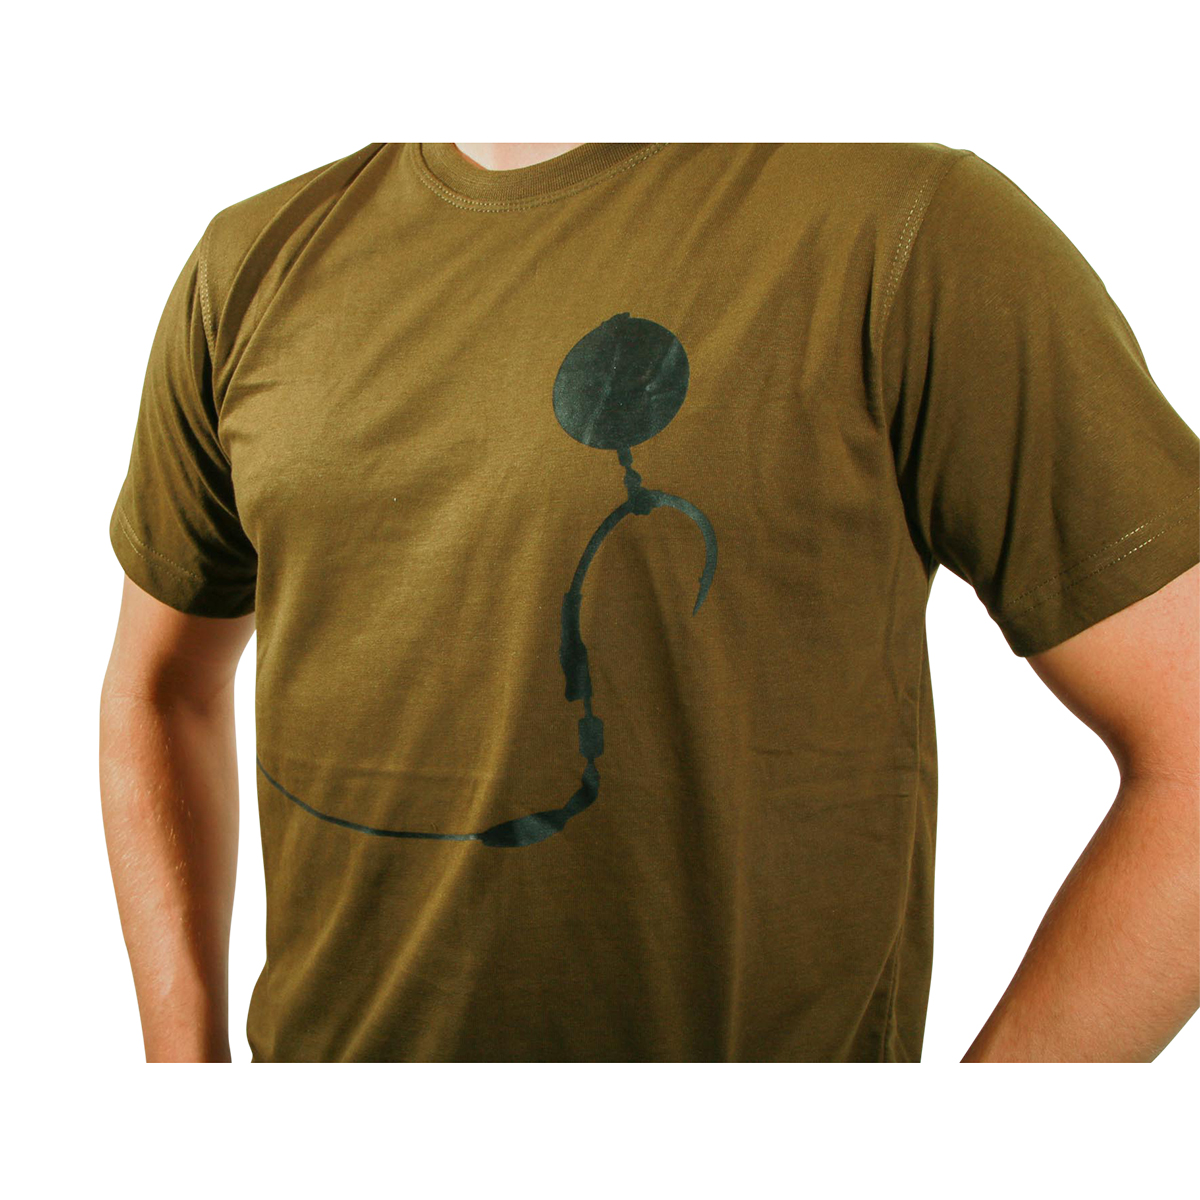 Tactic Carp T-shirt 'It's all about your tactics' Green